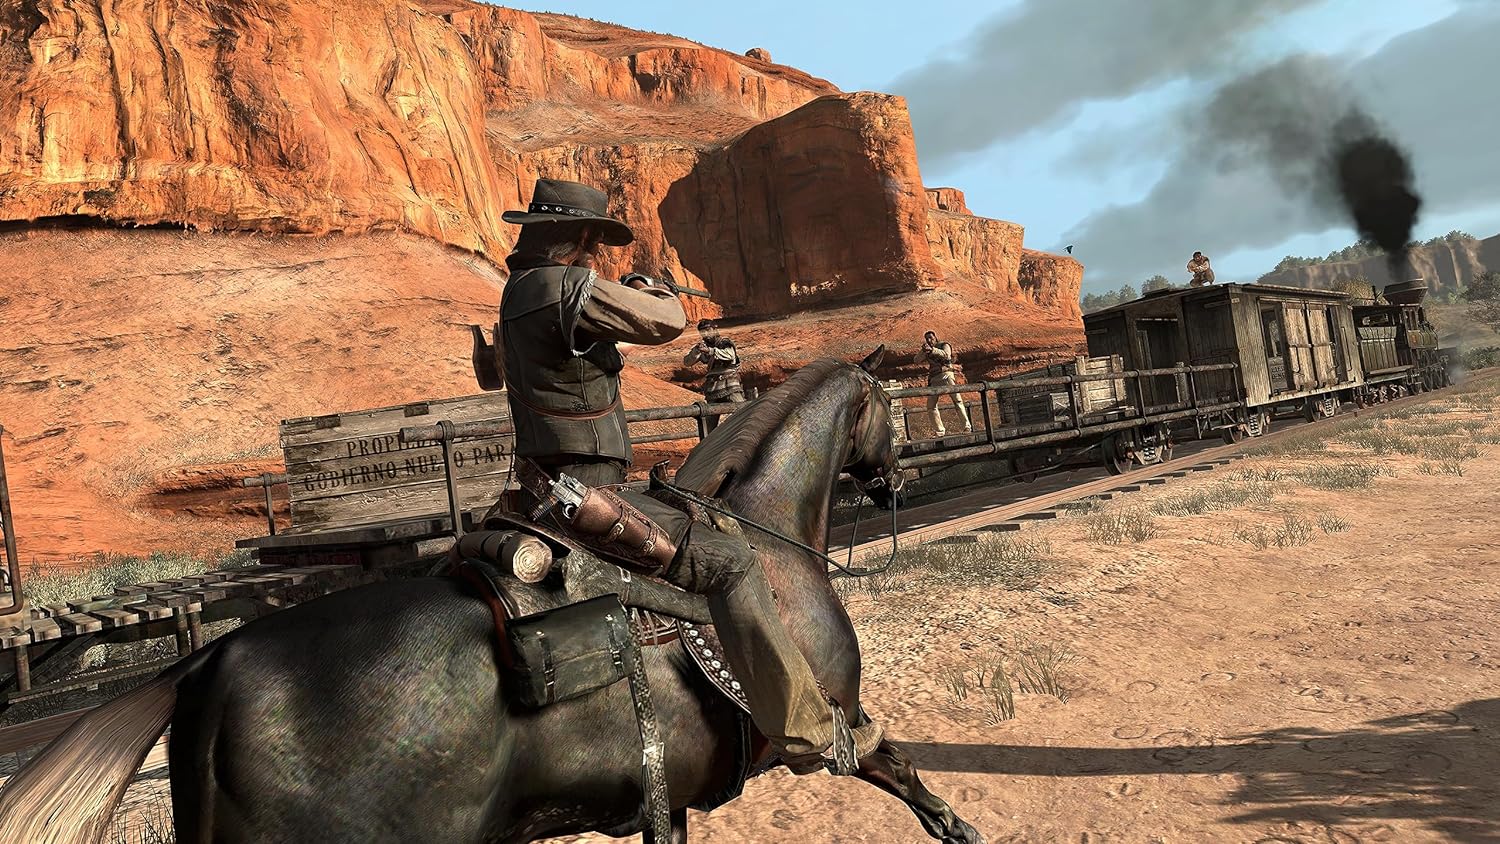 A gameplay screenshot from Red Dead Redemption ported to PS4.  John Marston (the protagonist) rides a horse, points his gun at a moving train and is shot by the outlaws.  Dark smoke billows from the train engine, with the rocky southwestern terrain visible behind it.